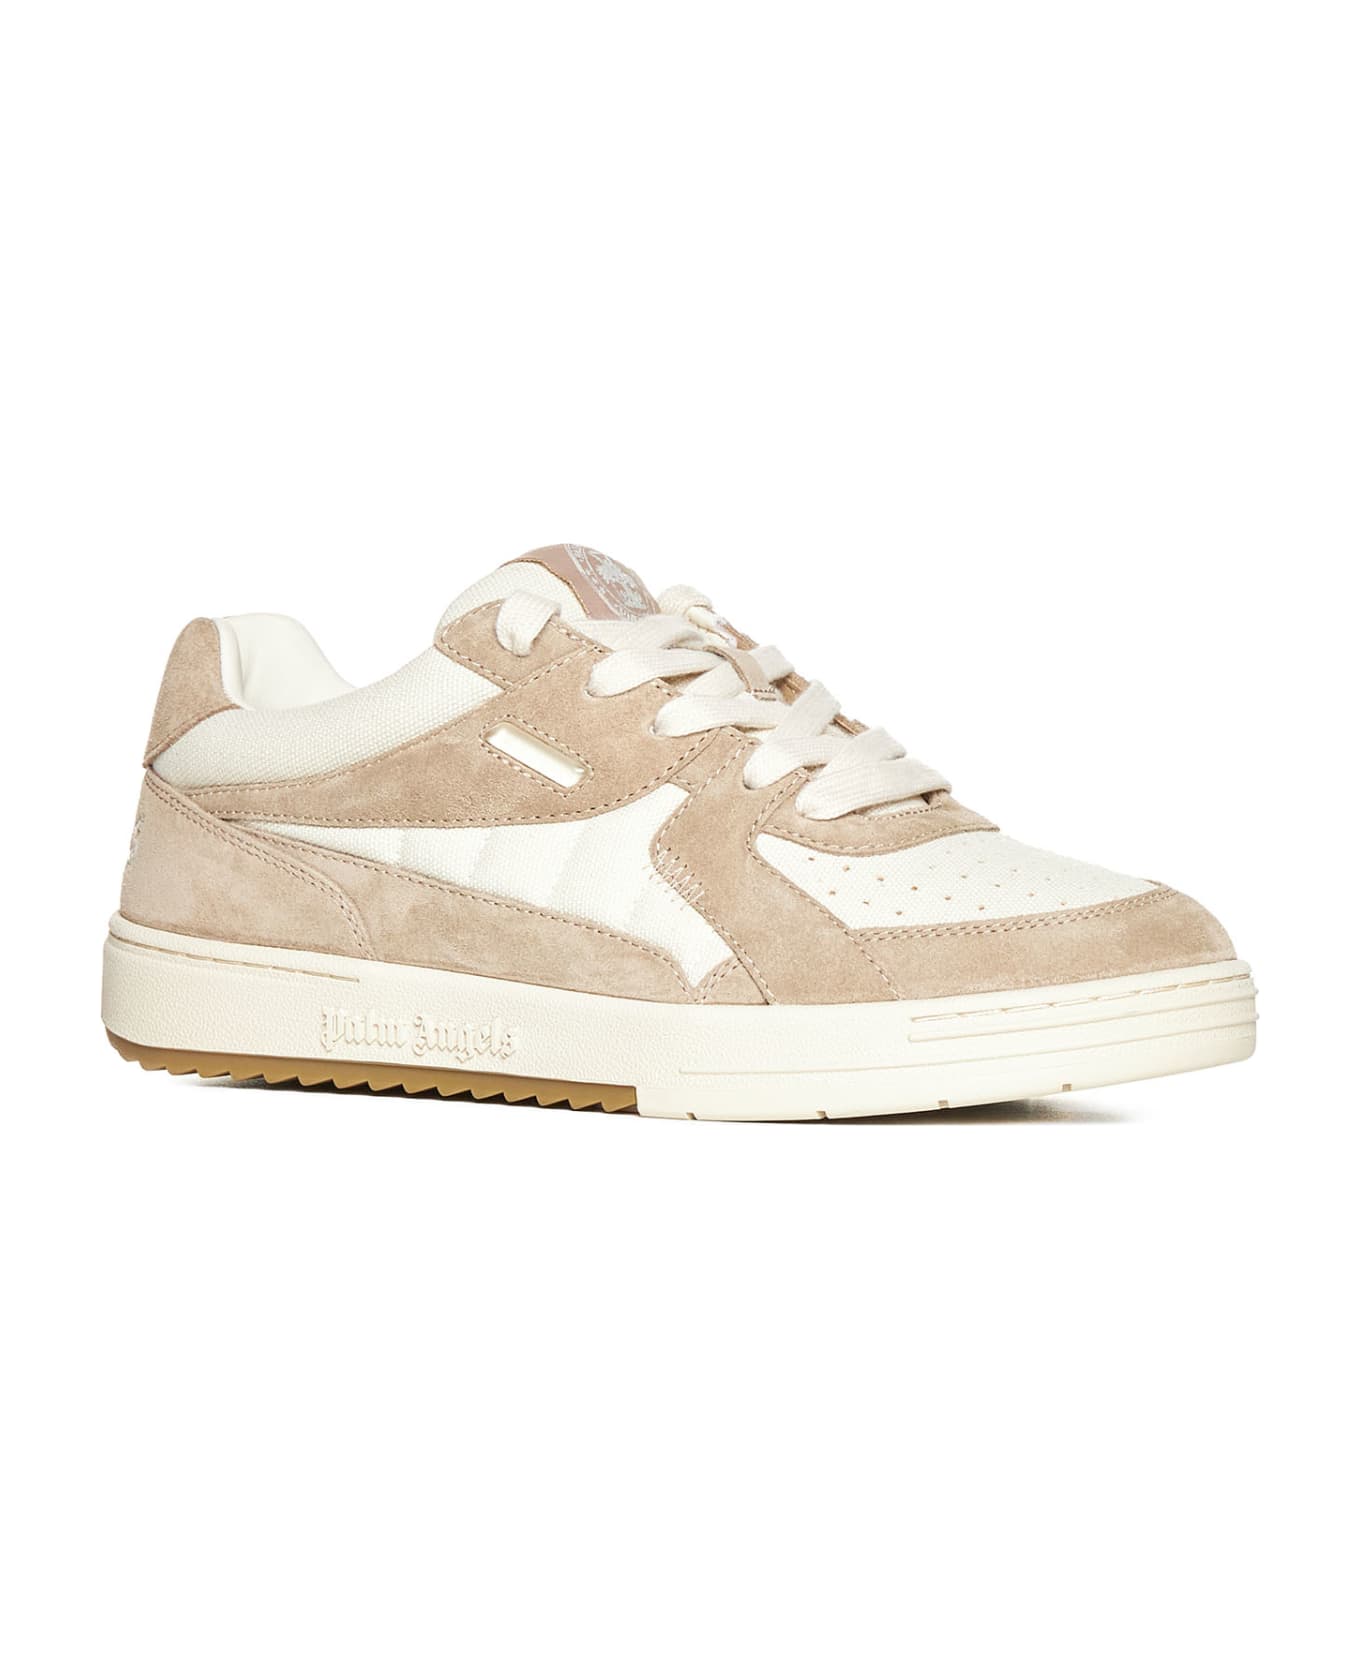 Palm Angels University Sneakers - White camel